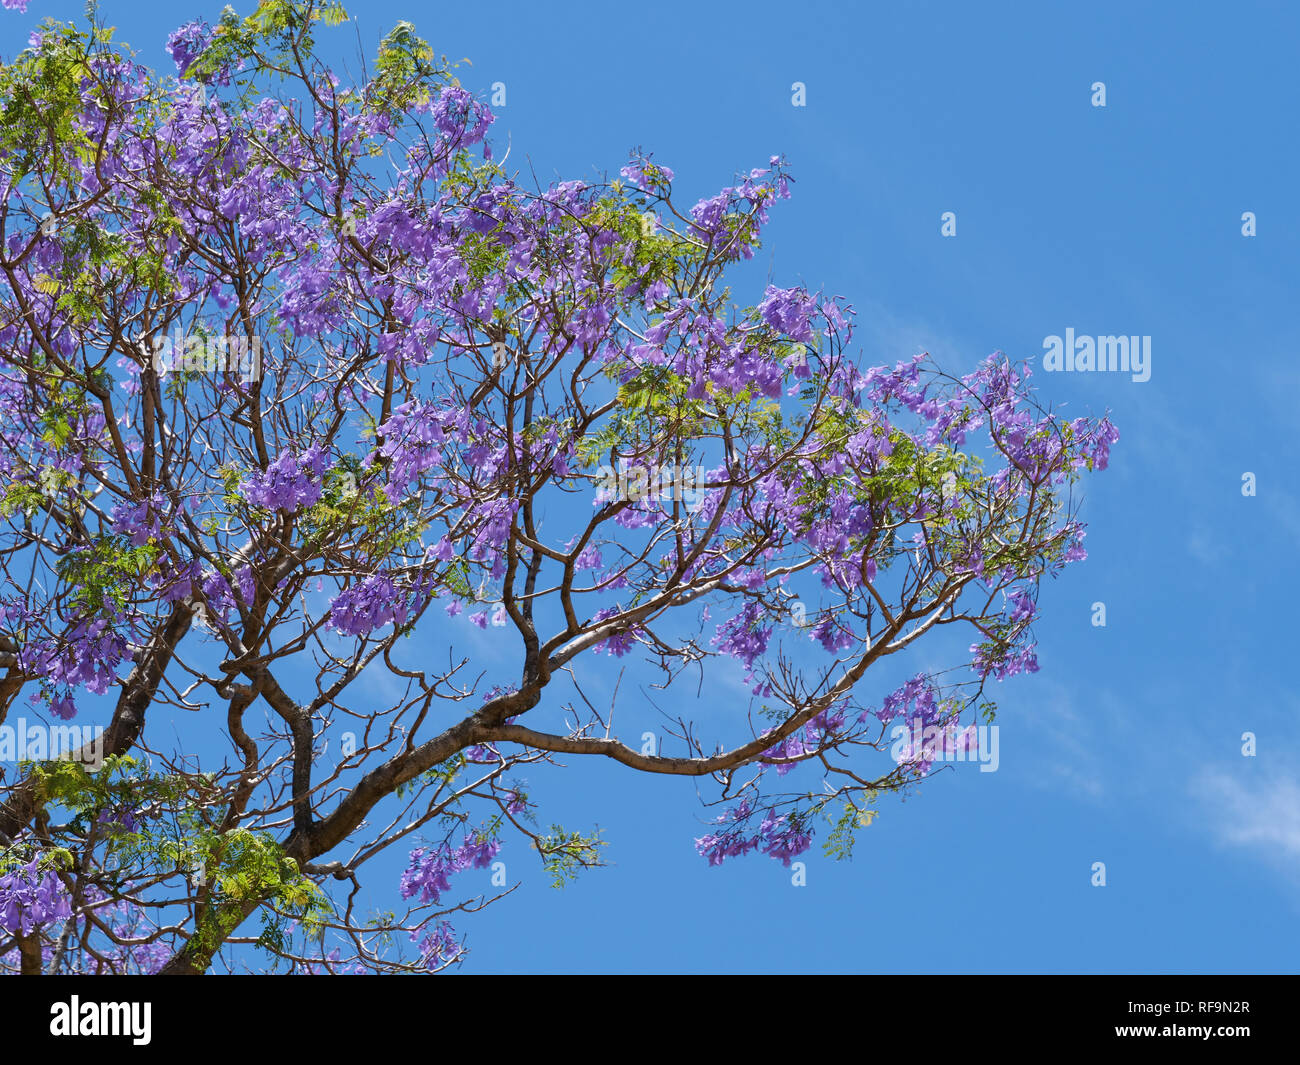 The blue purple flowering Jacaranda trees are one of the relative few trees imported to Australia and often found in Australian gardens. Stock Photo